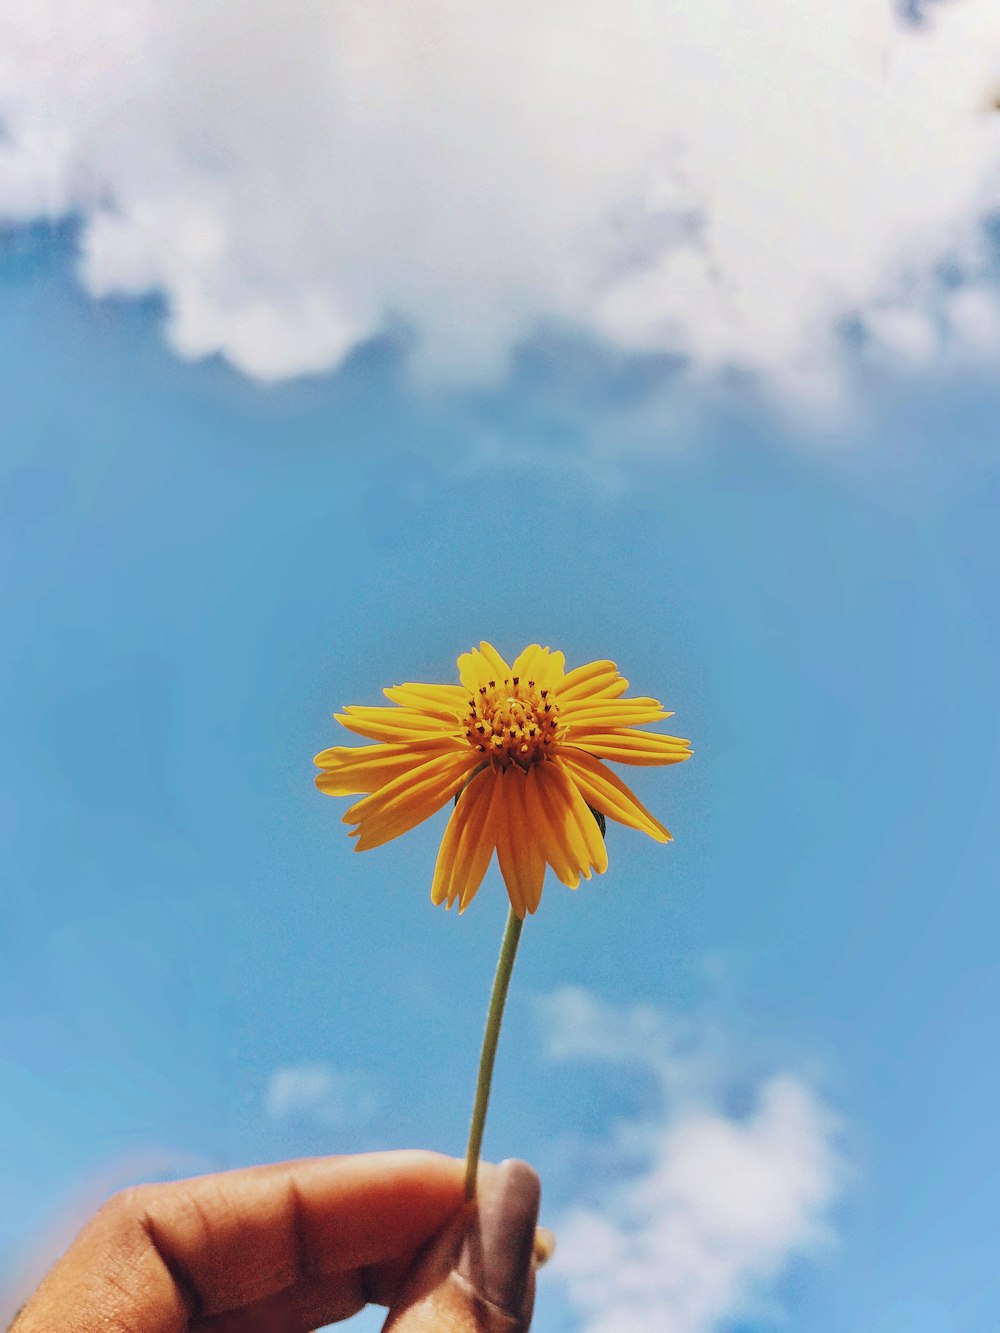 1K+ Aesthetic Flower Pictures | Download Free Images on Unsplash